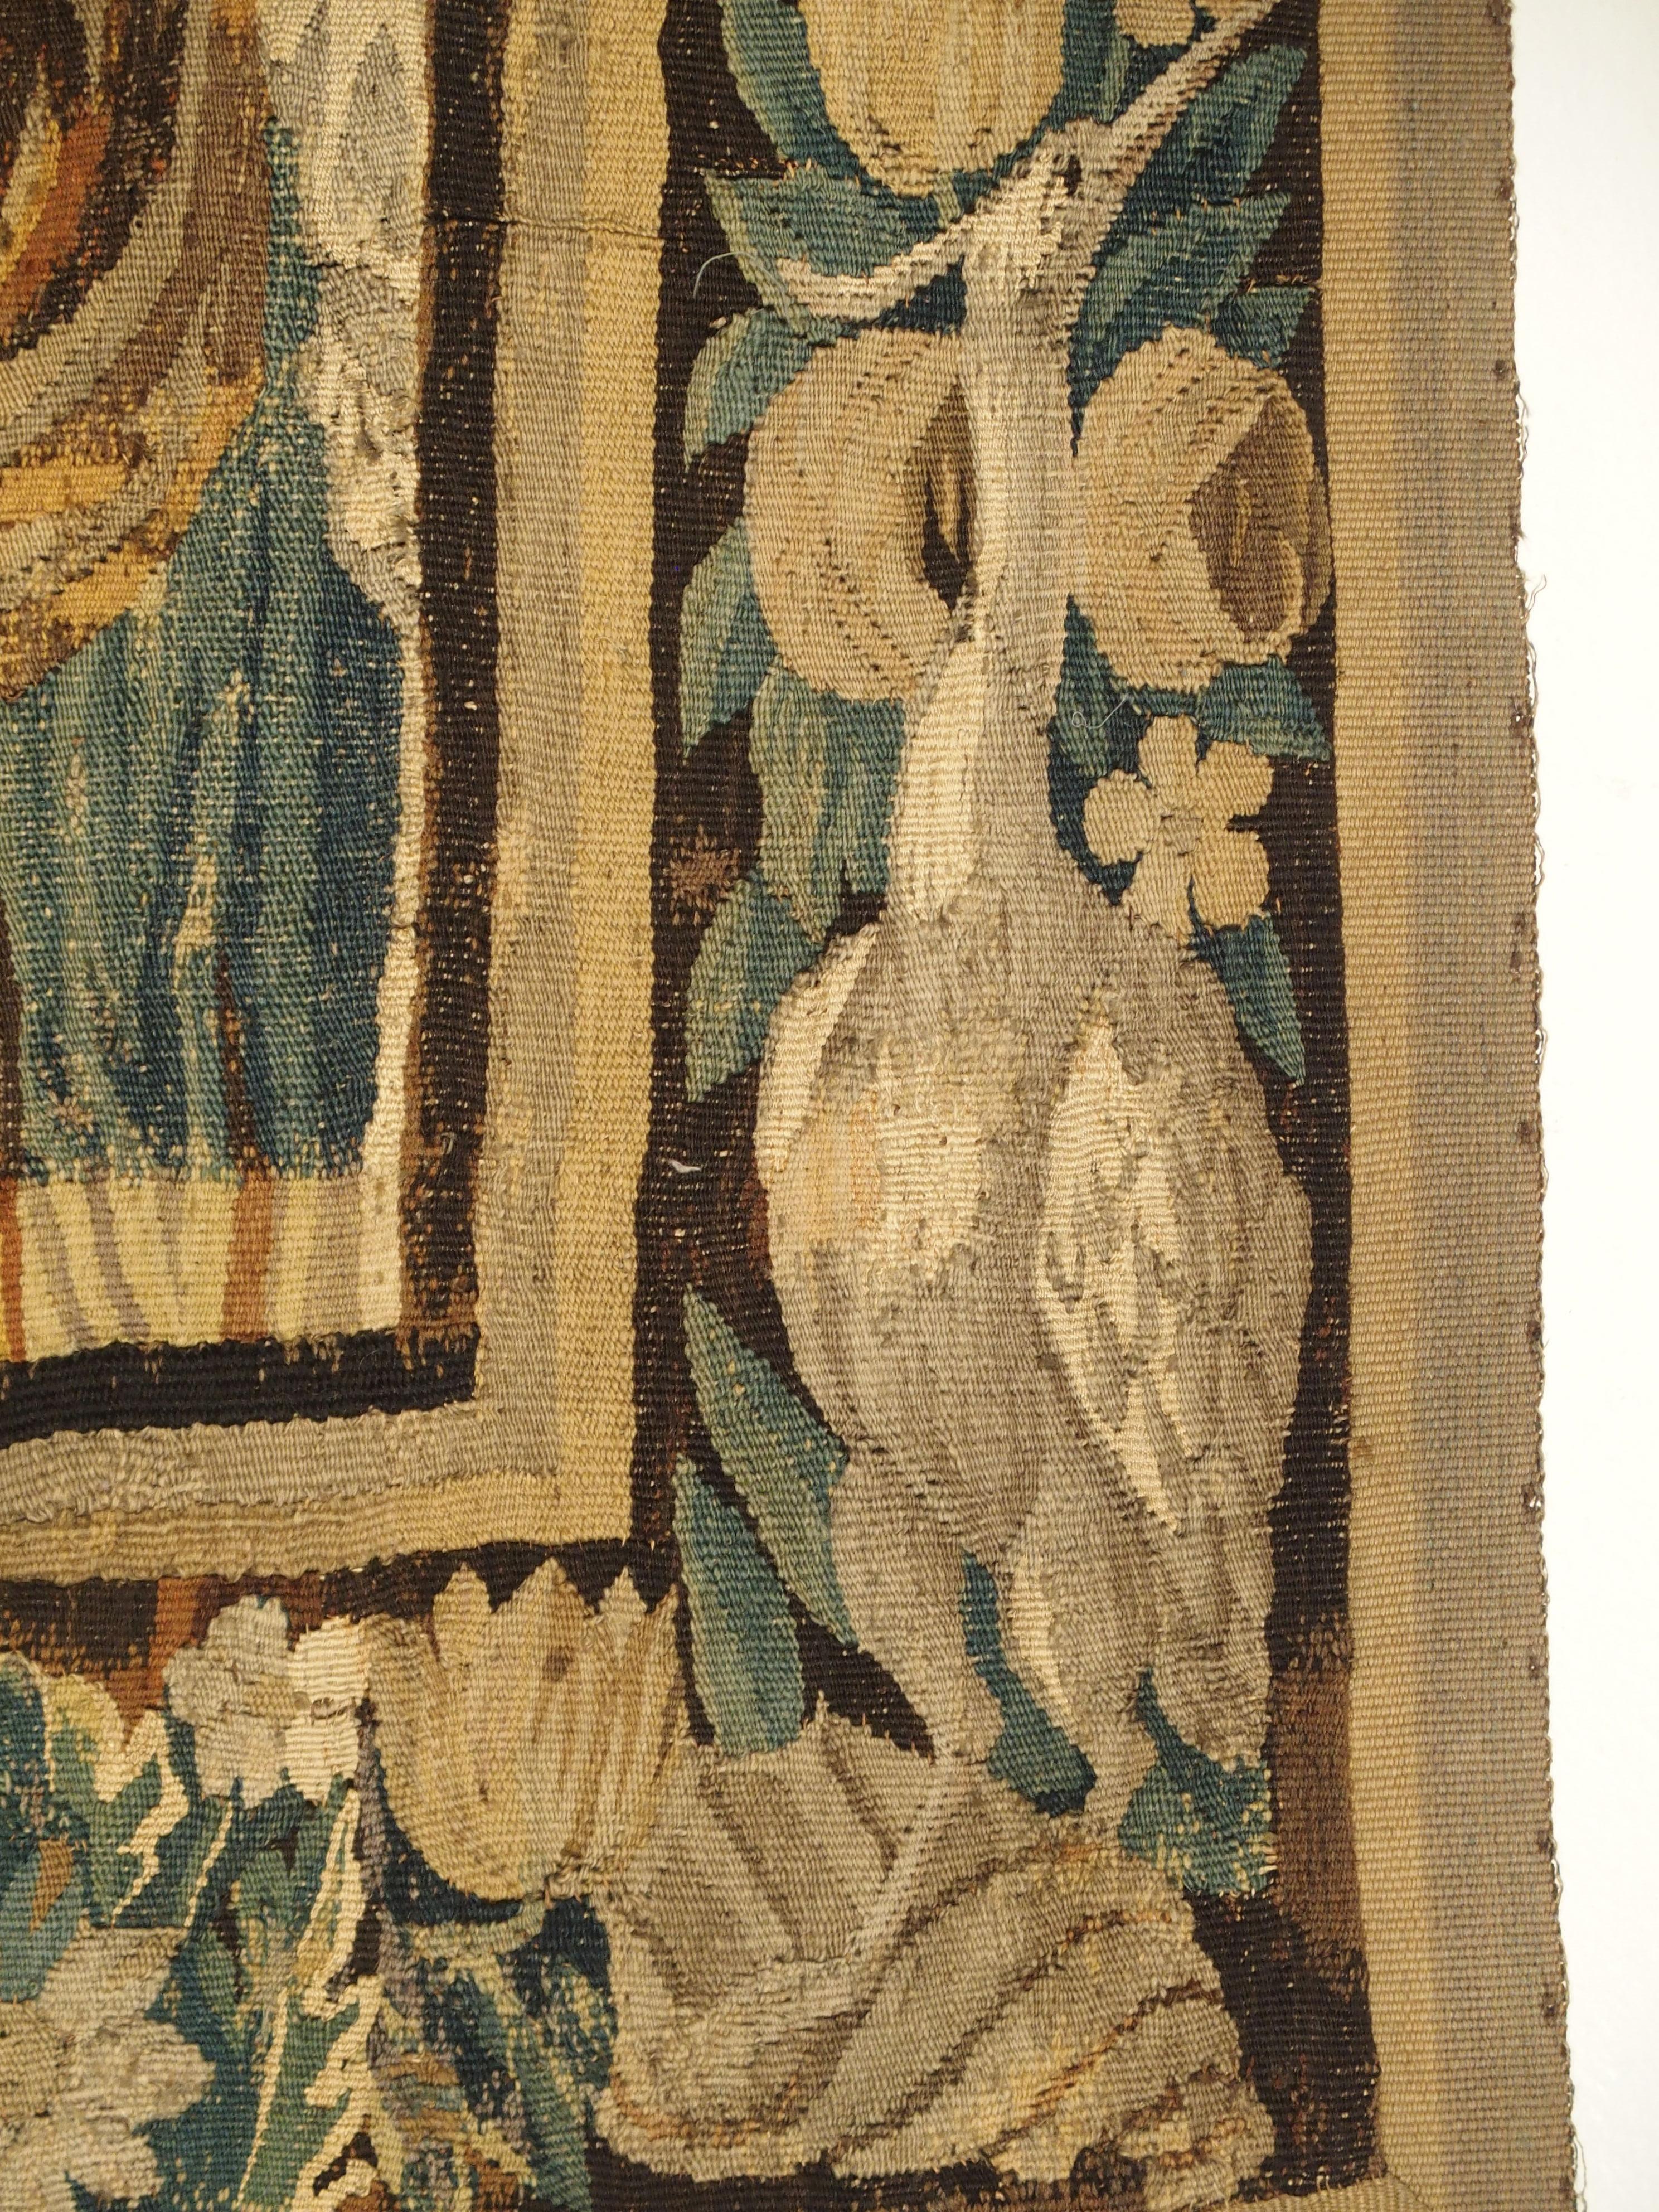 17th Century Tapestry Fragment with Ornate Border 7